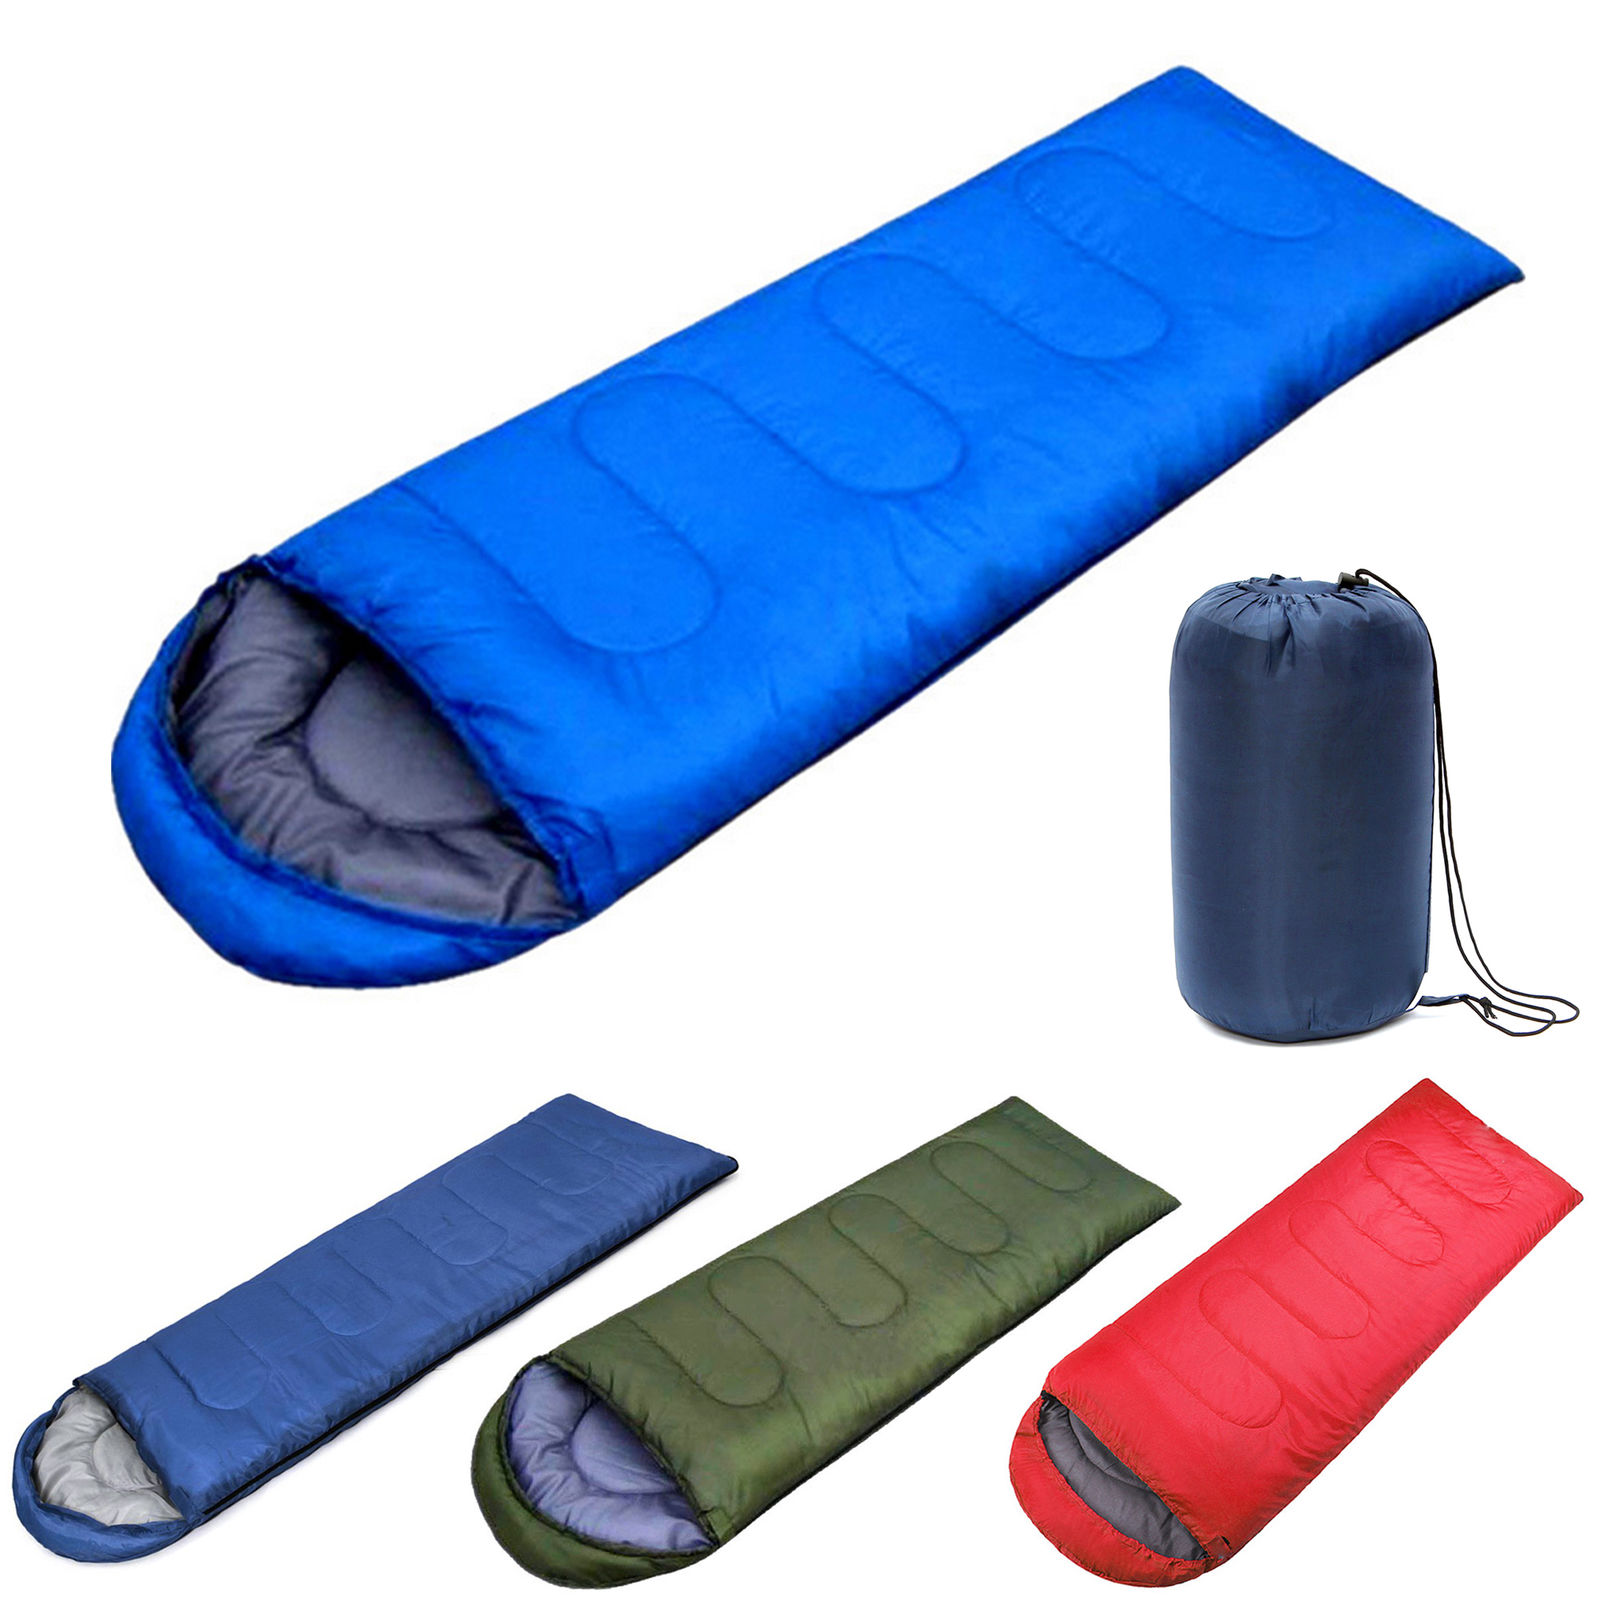 IPRee-Waterproof-210x75CM-Sleeping-Bag-Single-Person-for-Outdoor-Hiking-Camping-Warm-Soft-Adult-Home-1634657-10